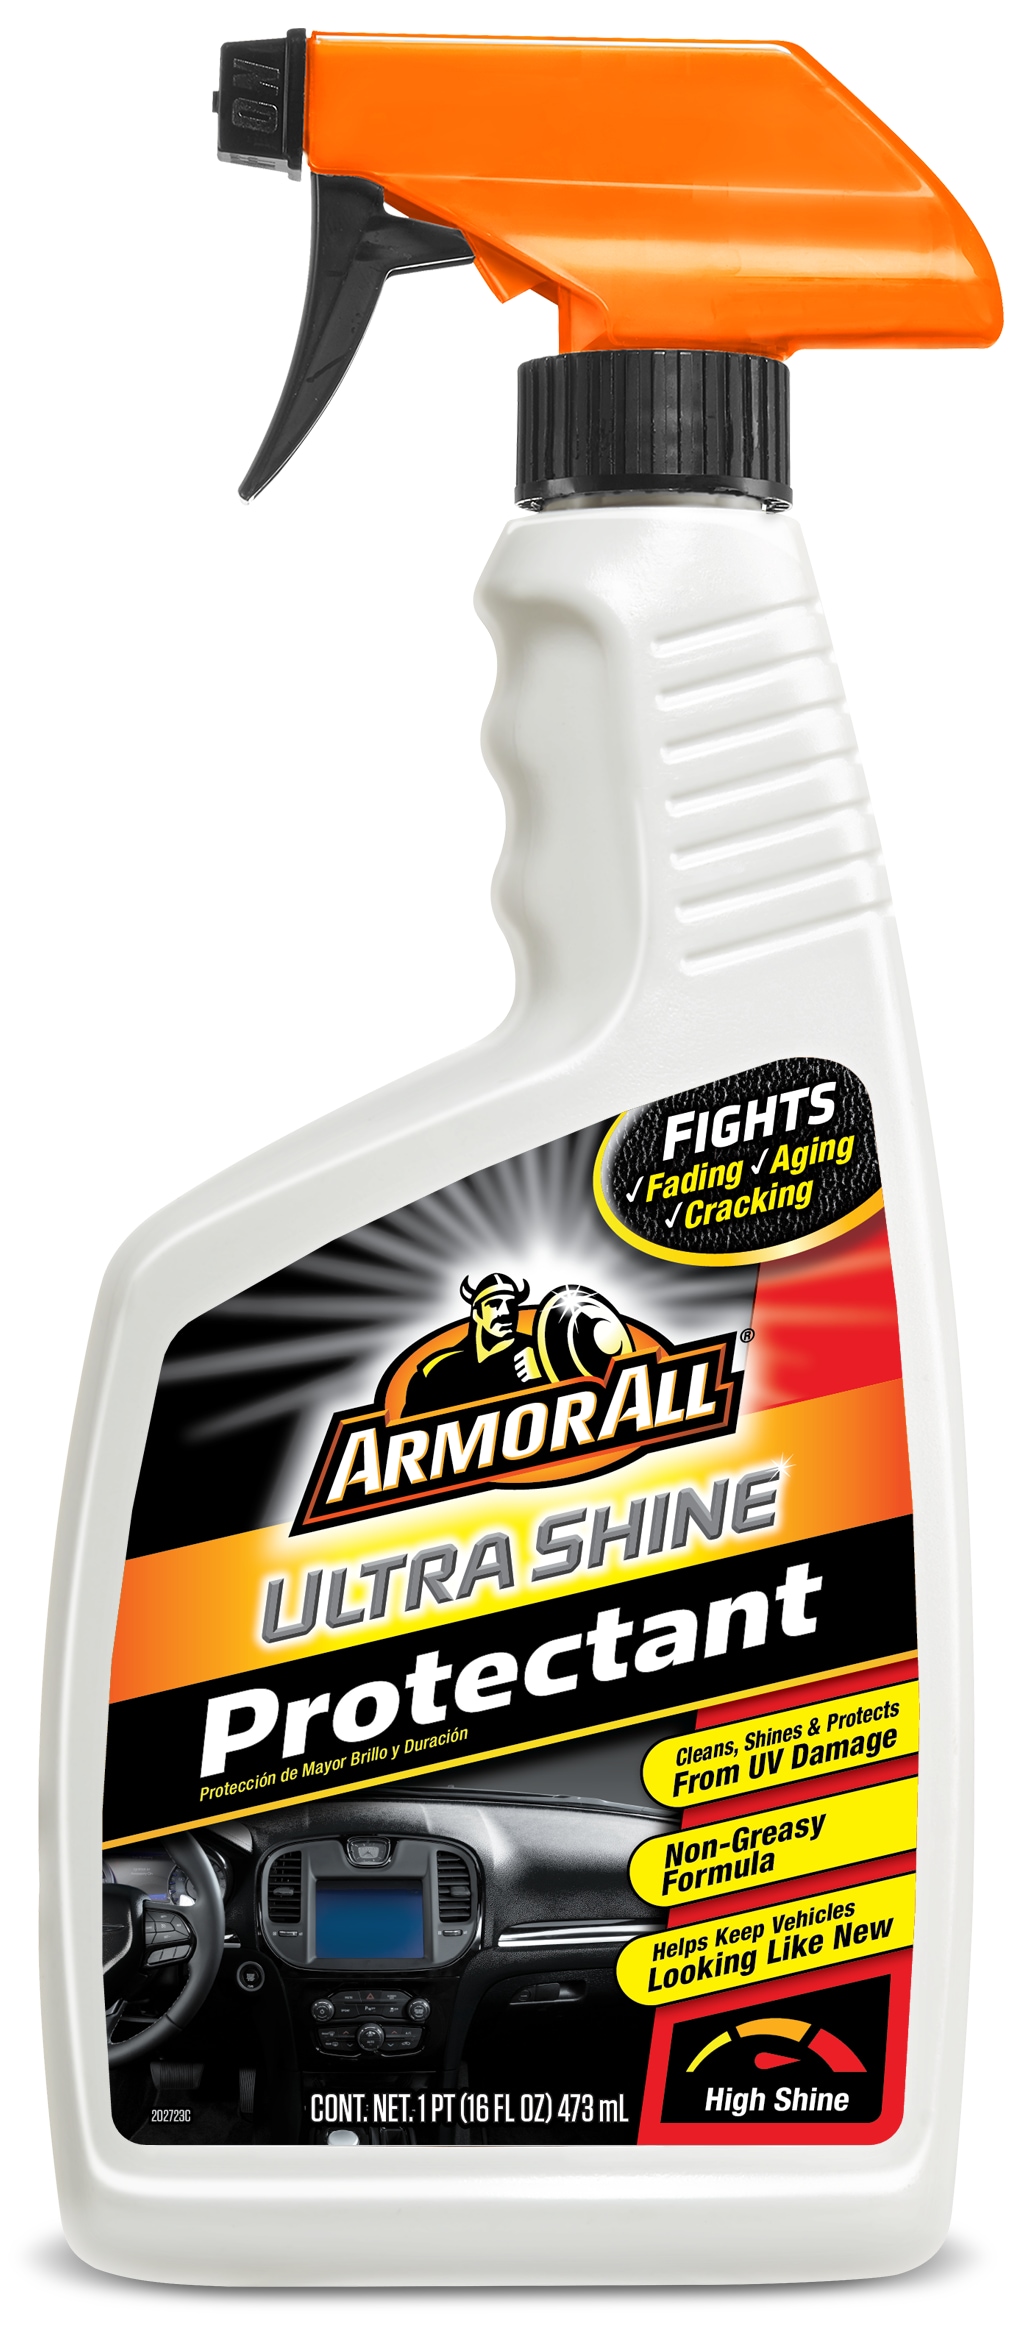 Armor All Auto Glass Cleaner, 22-Fluid Ounce Bottles (Pack of 6)